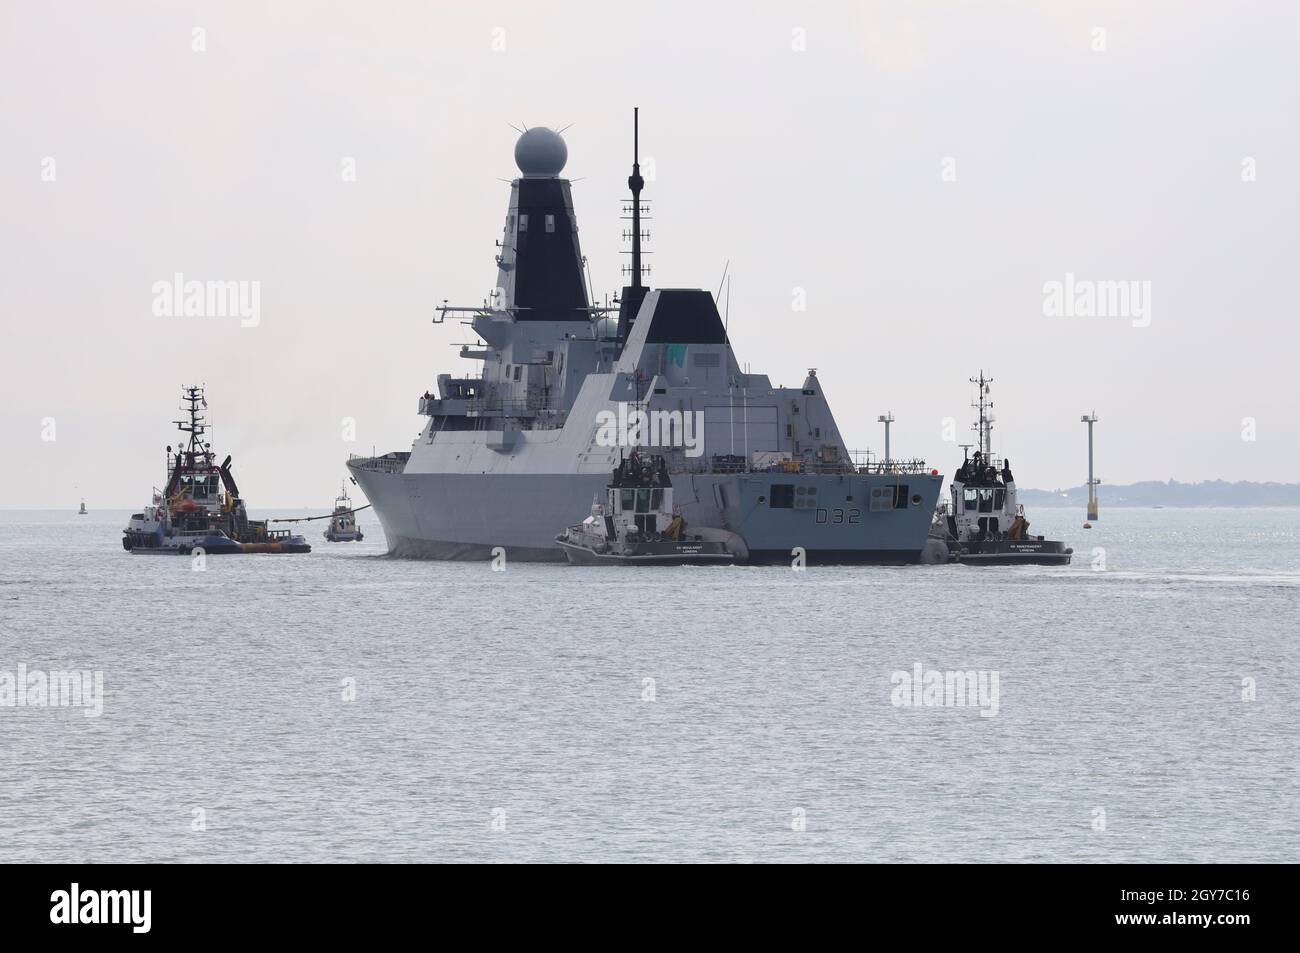 Tugs guide the Royal Navy Type 45 destroyer HMS DARING into The Solent Stock Photo